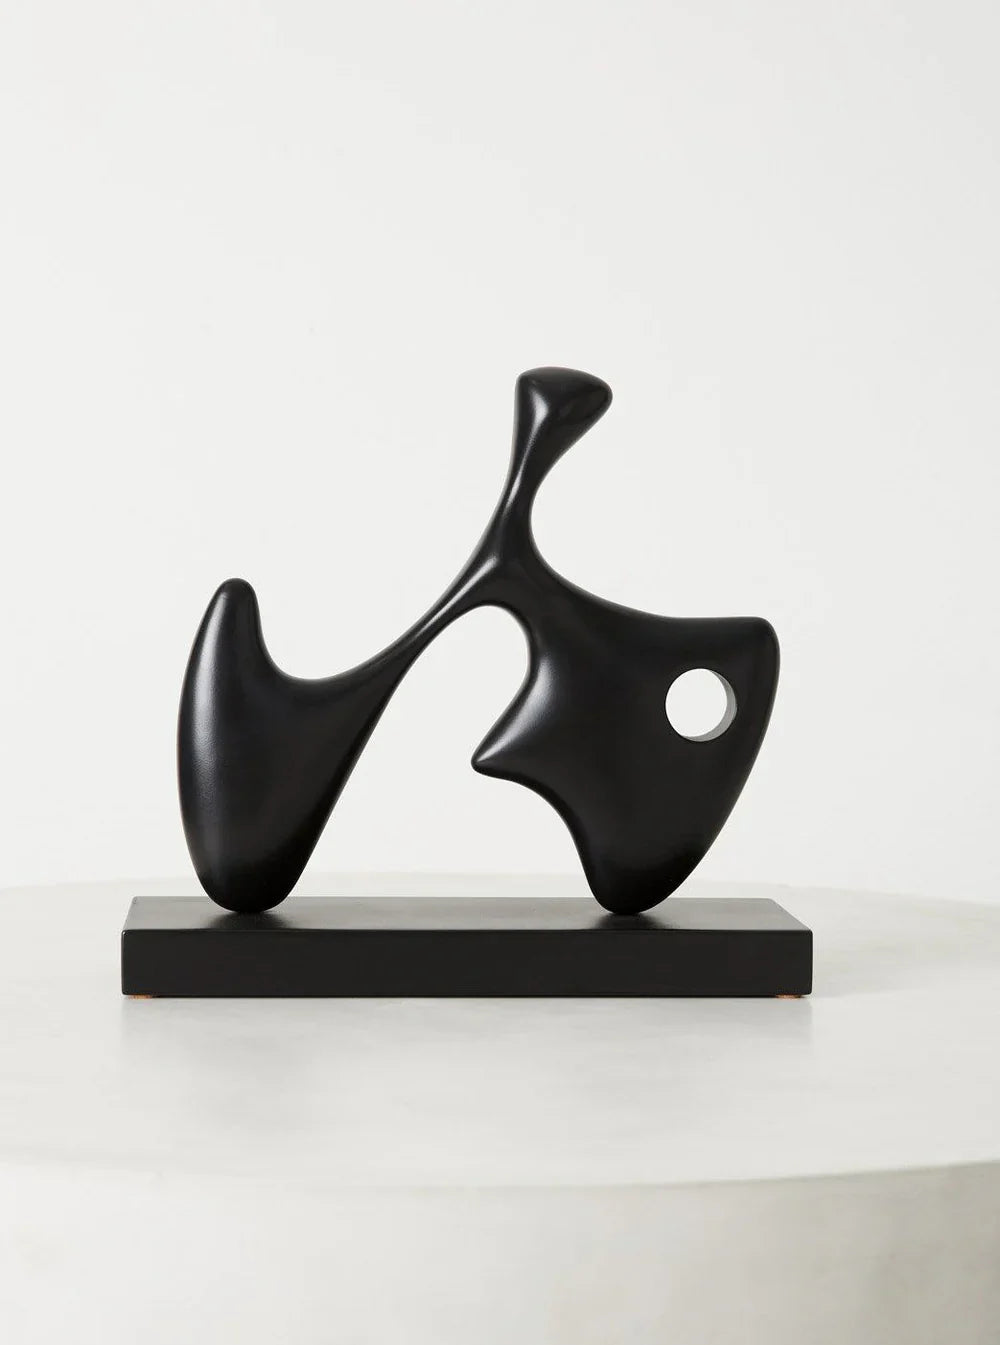 Abstract black sculpture with smooth, flowing shapes and a small circular cutout, mounted on a rectangular base. The artwork features organic, fluid lines and a modern, minimalist design, set against a plain white background.